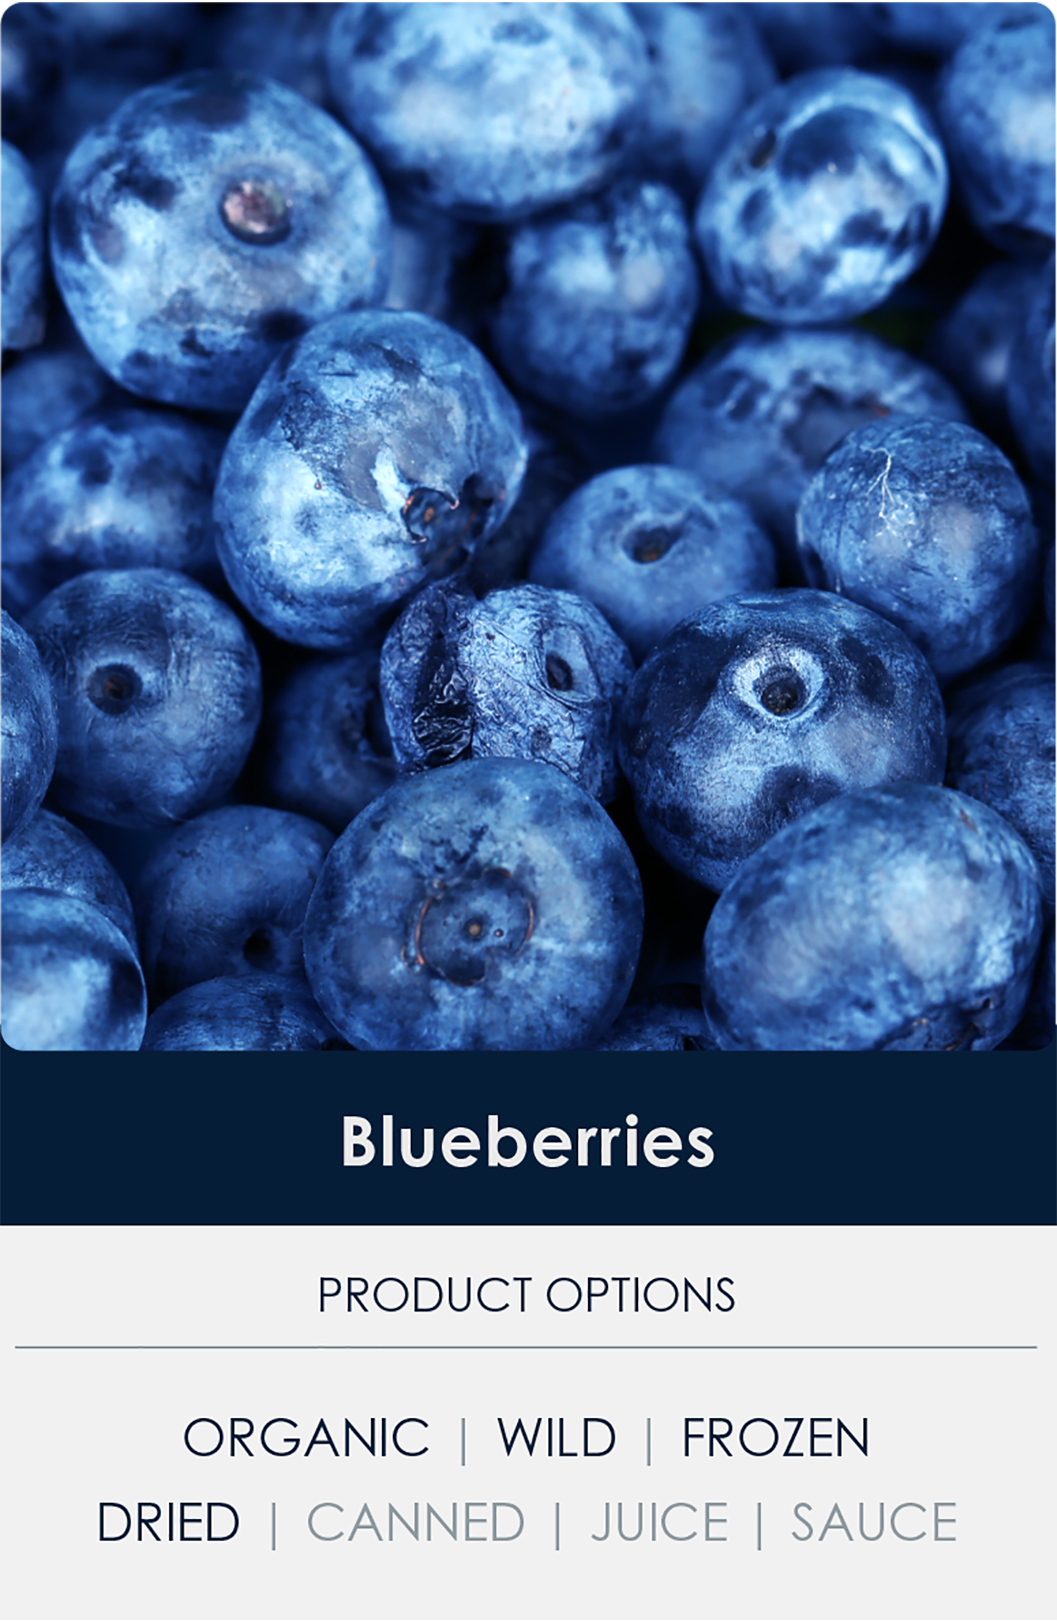 Blueberries photographed above a rendered list of product options: organic, wild, frozen, dried, canned, juice, sauce.